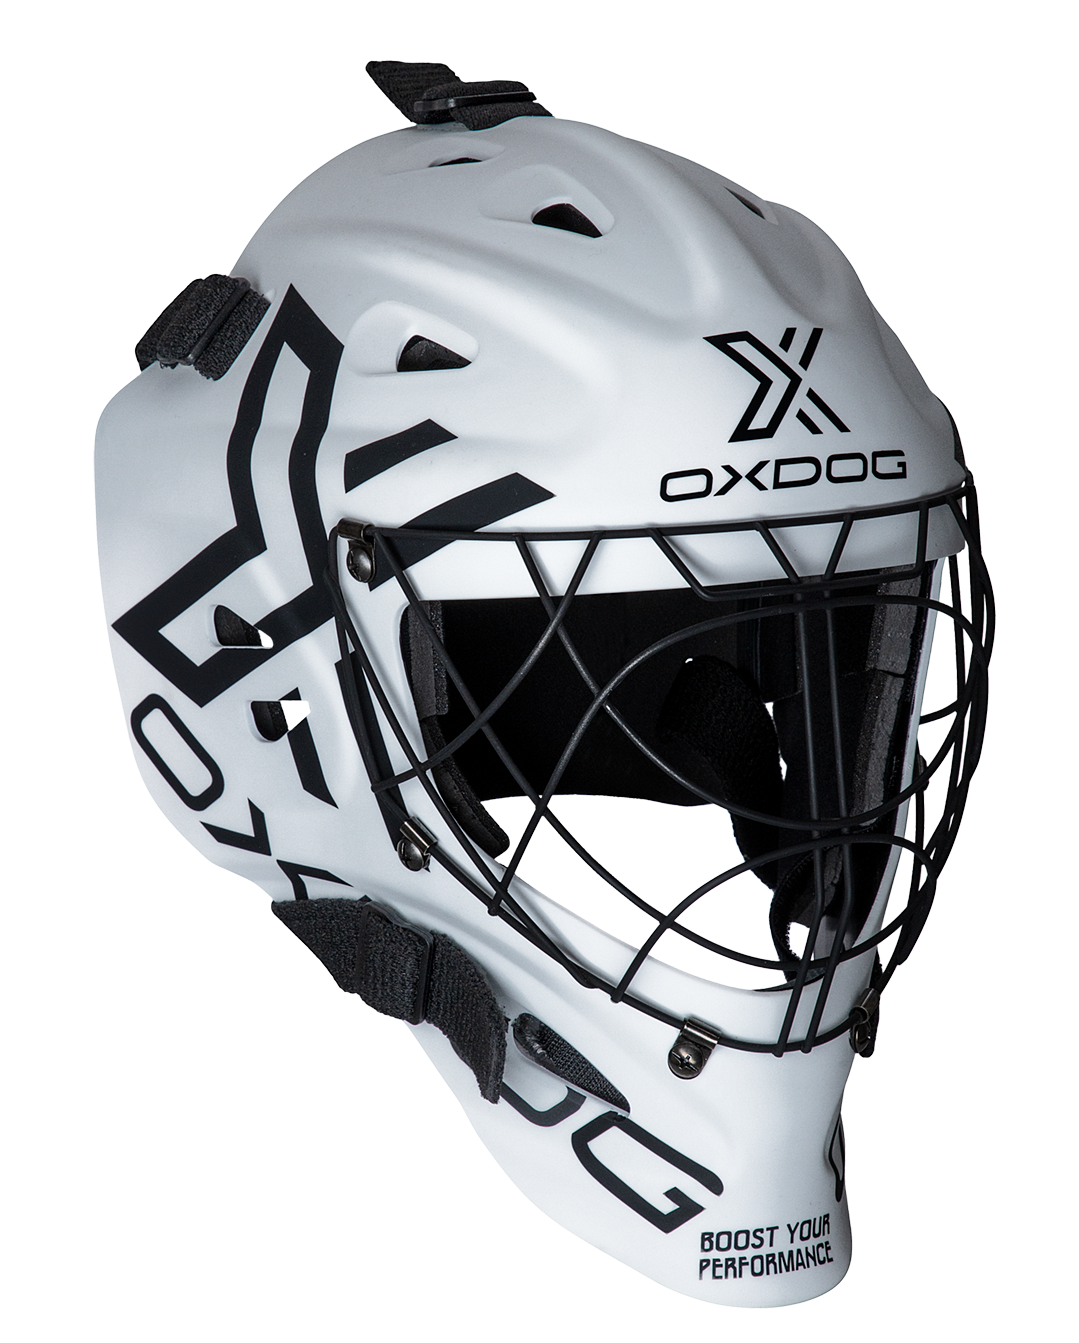 casques oxdog